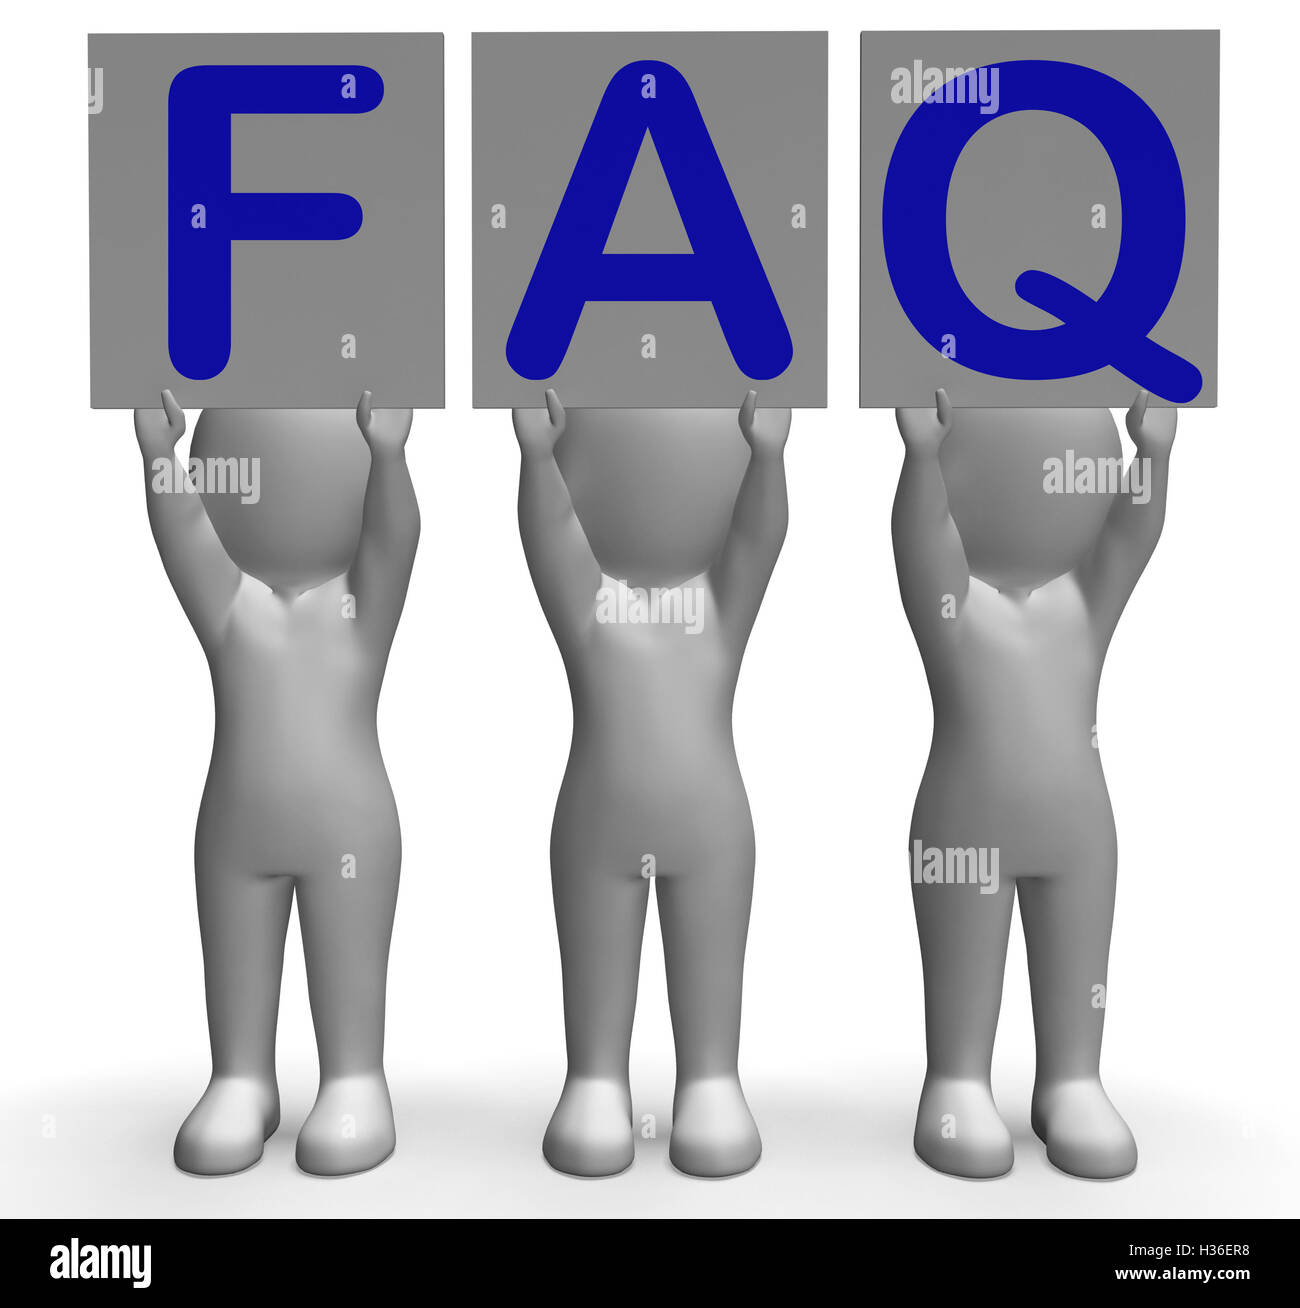 FAQ Banners Shows Frequent Assistance And Support Stock Photo